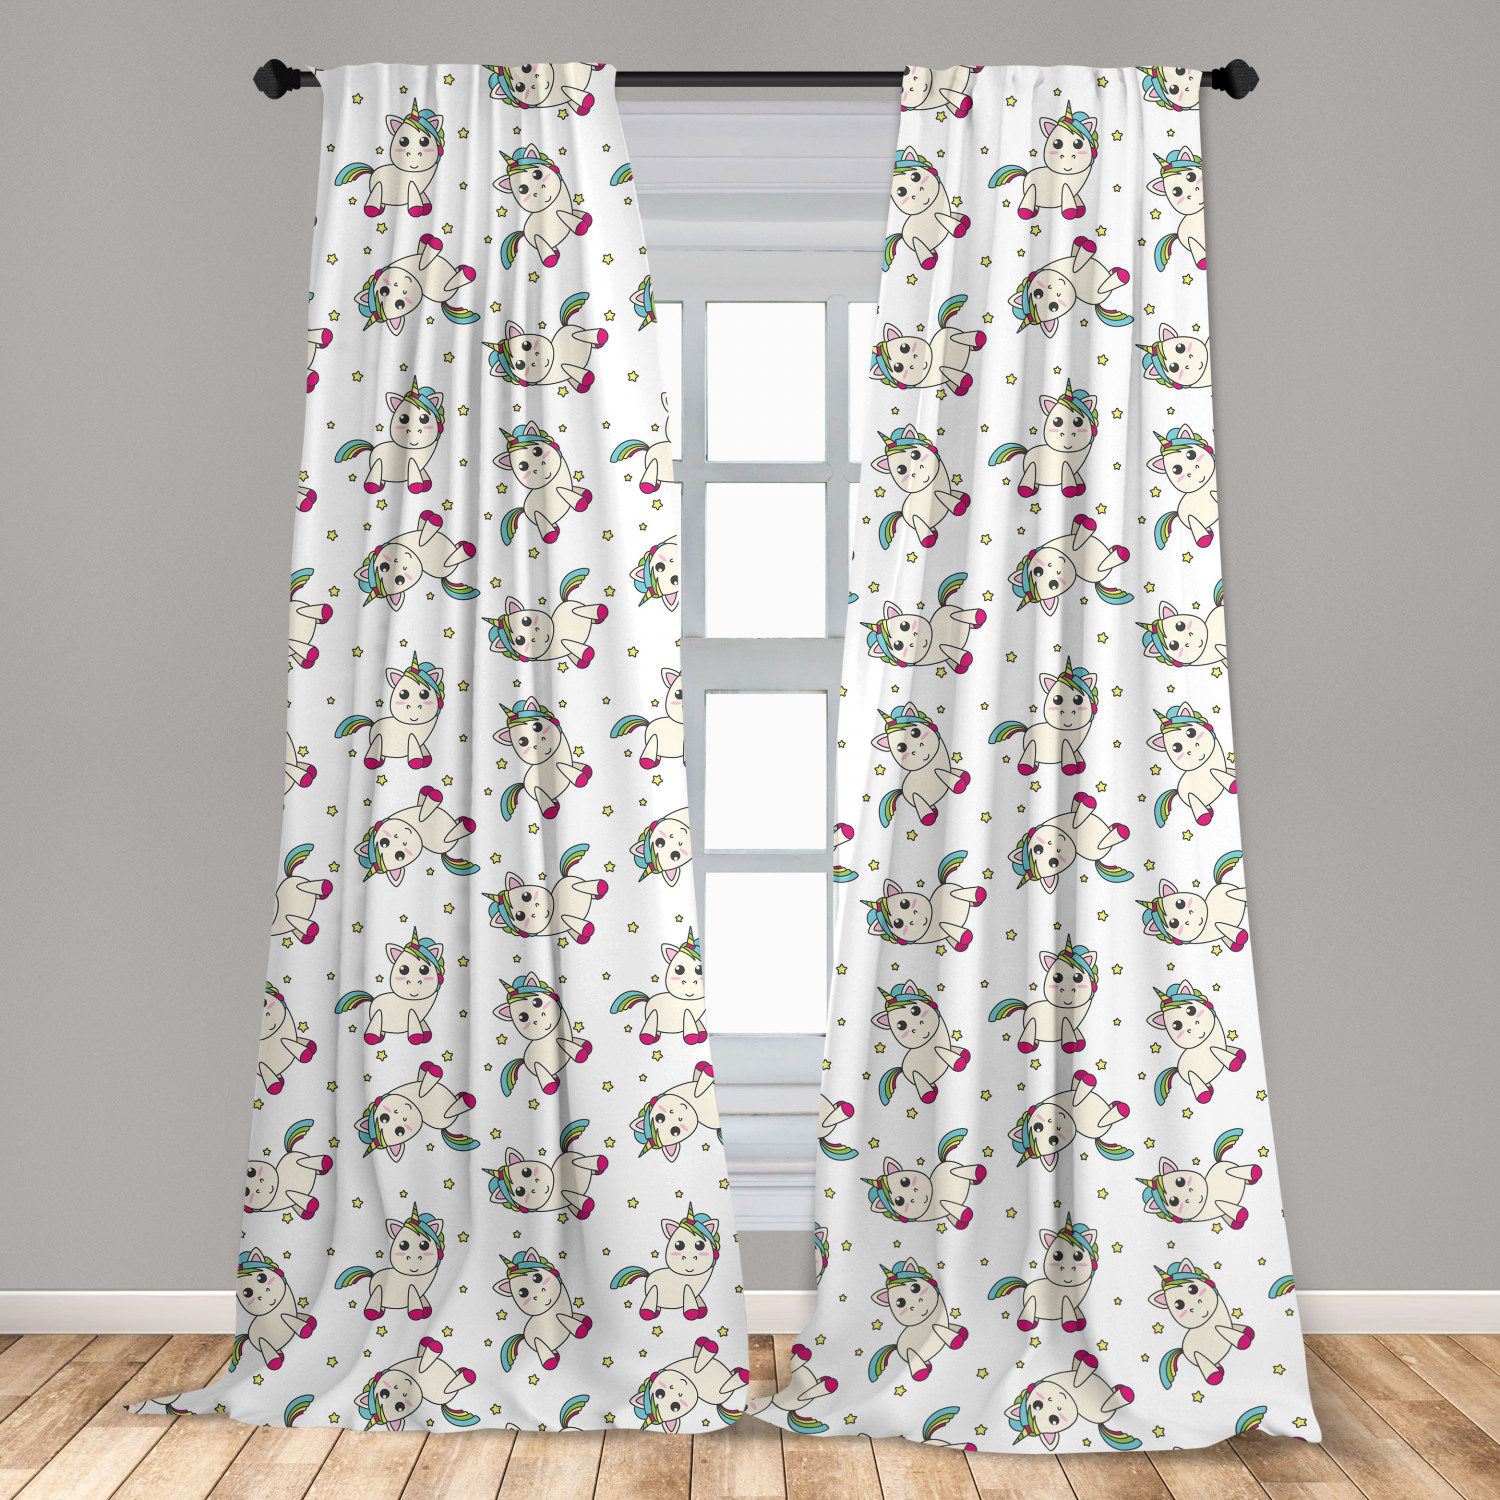 Unicorn Microfiber Curtains 2 Panel Set for Living Room Bedroom in 3 Sizes 